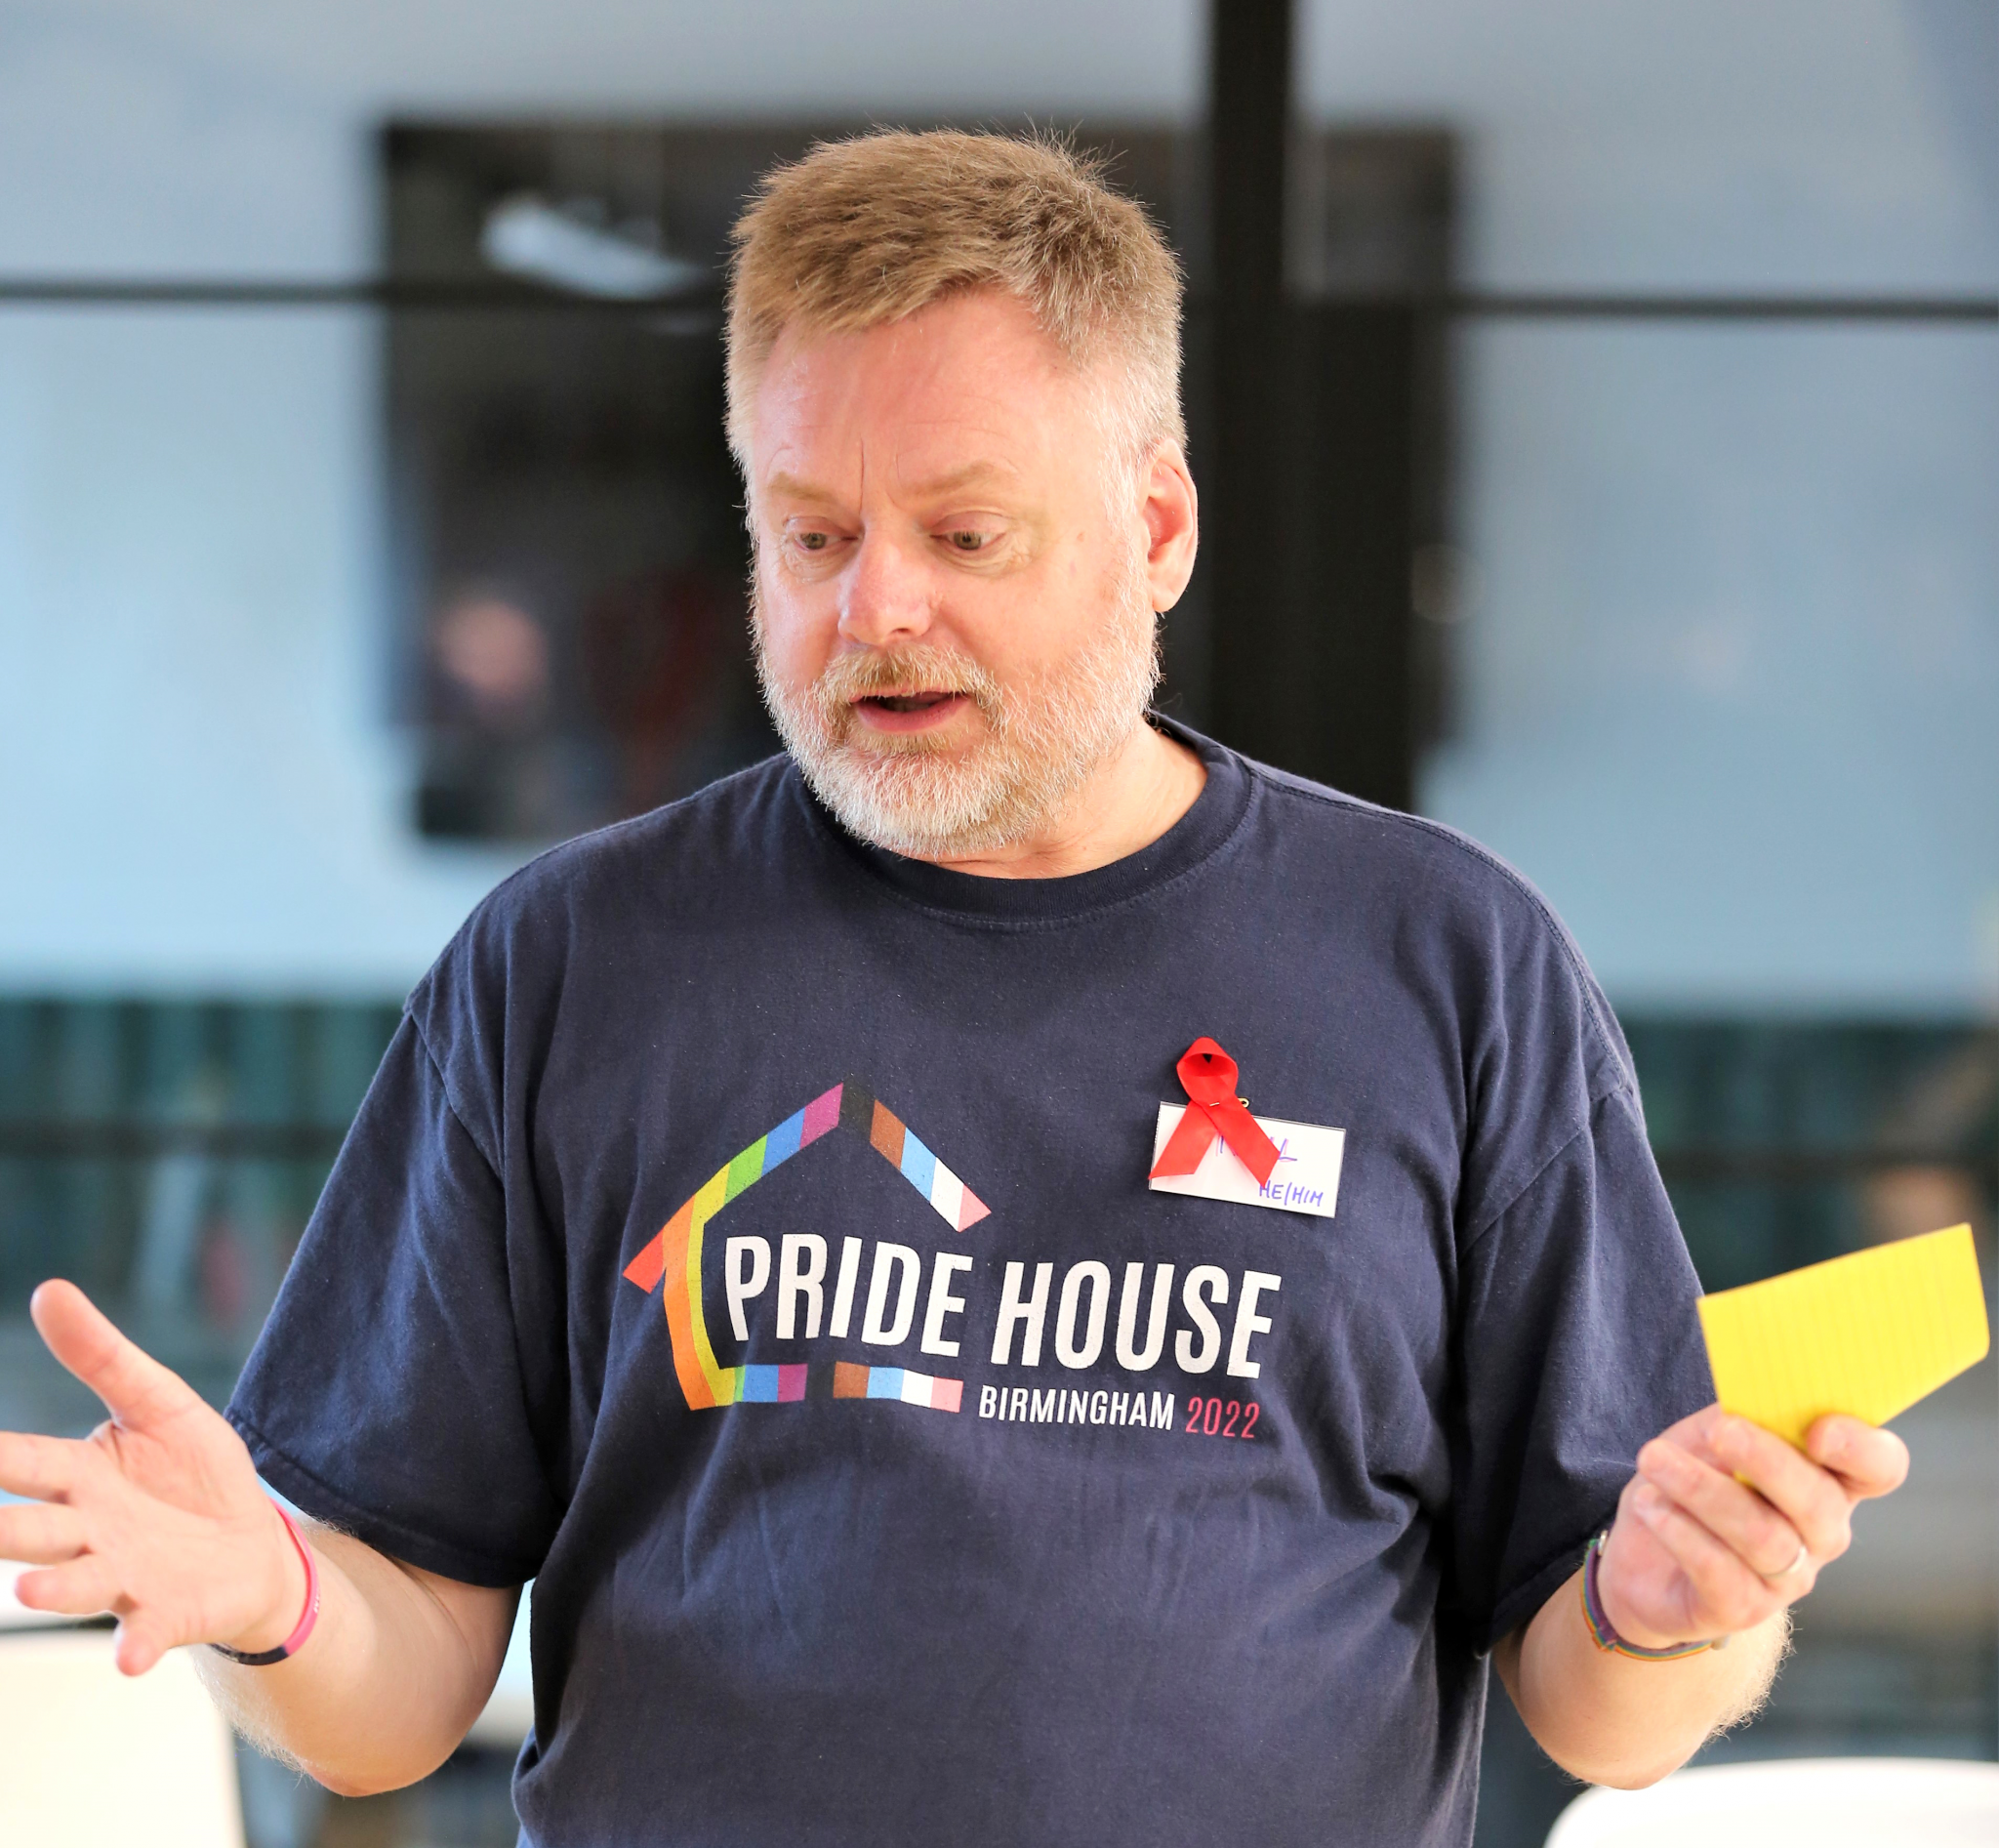 Pride House hopes to educate Commonwealth on HIV and AIDS after quilt ceremony